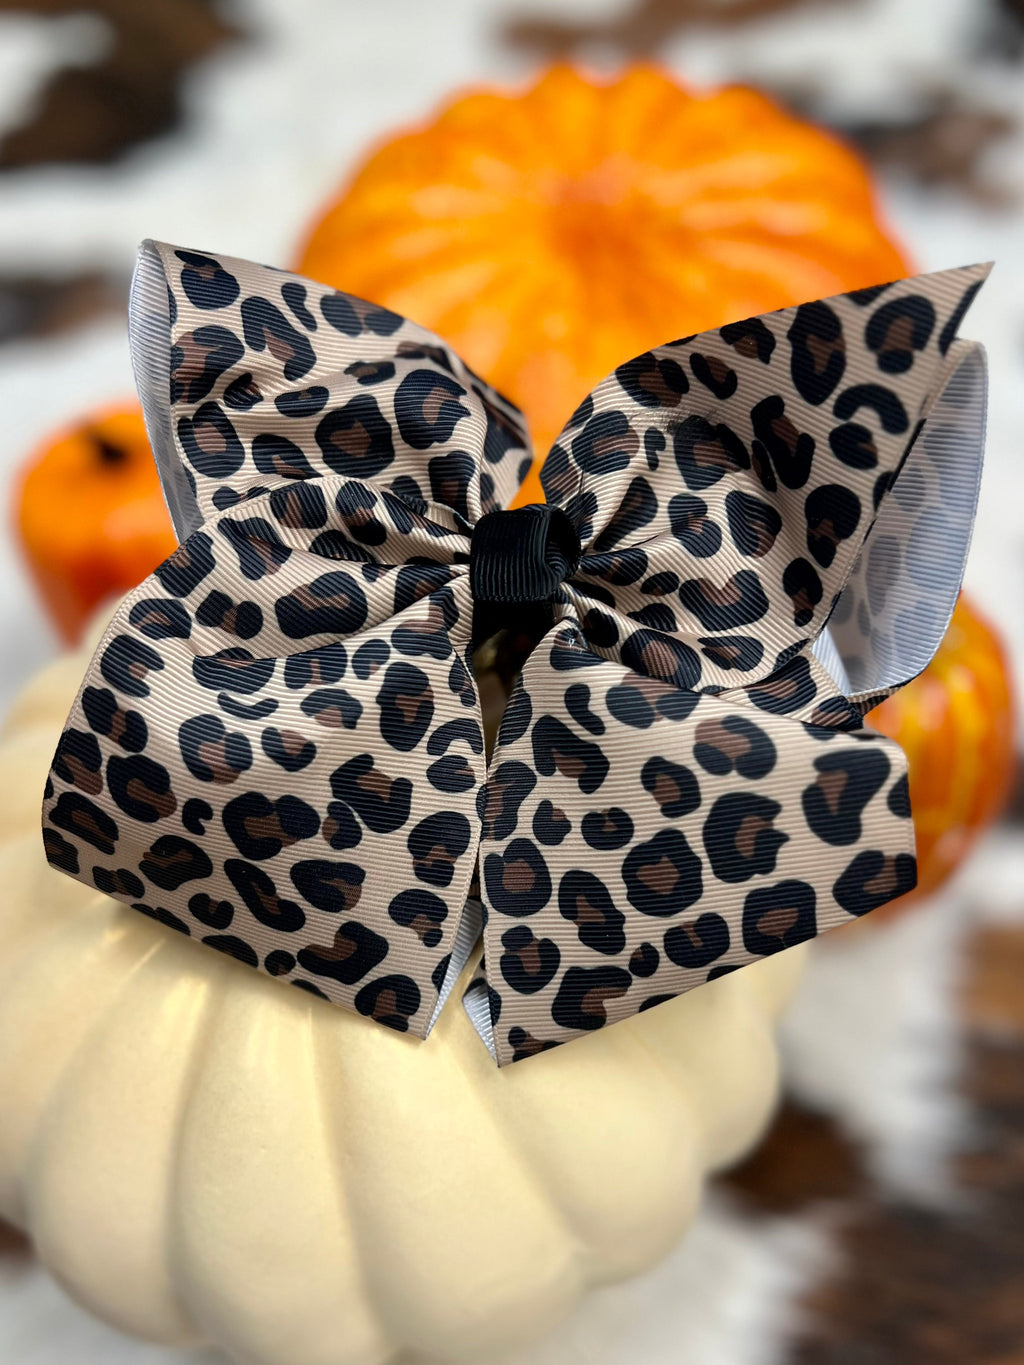 Show off your wild side with these two-tone Animal Print Bows! Choose between Cheetah Print and Cow Print and let your true animal-loving colors shine! Each 6" bow comes with an alligator clip to keep it secure. Go ahead, get wild!